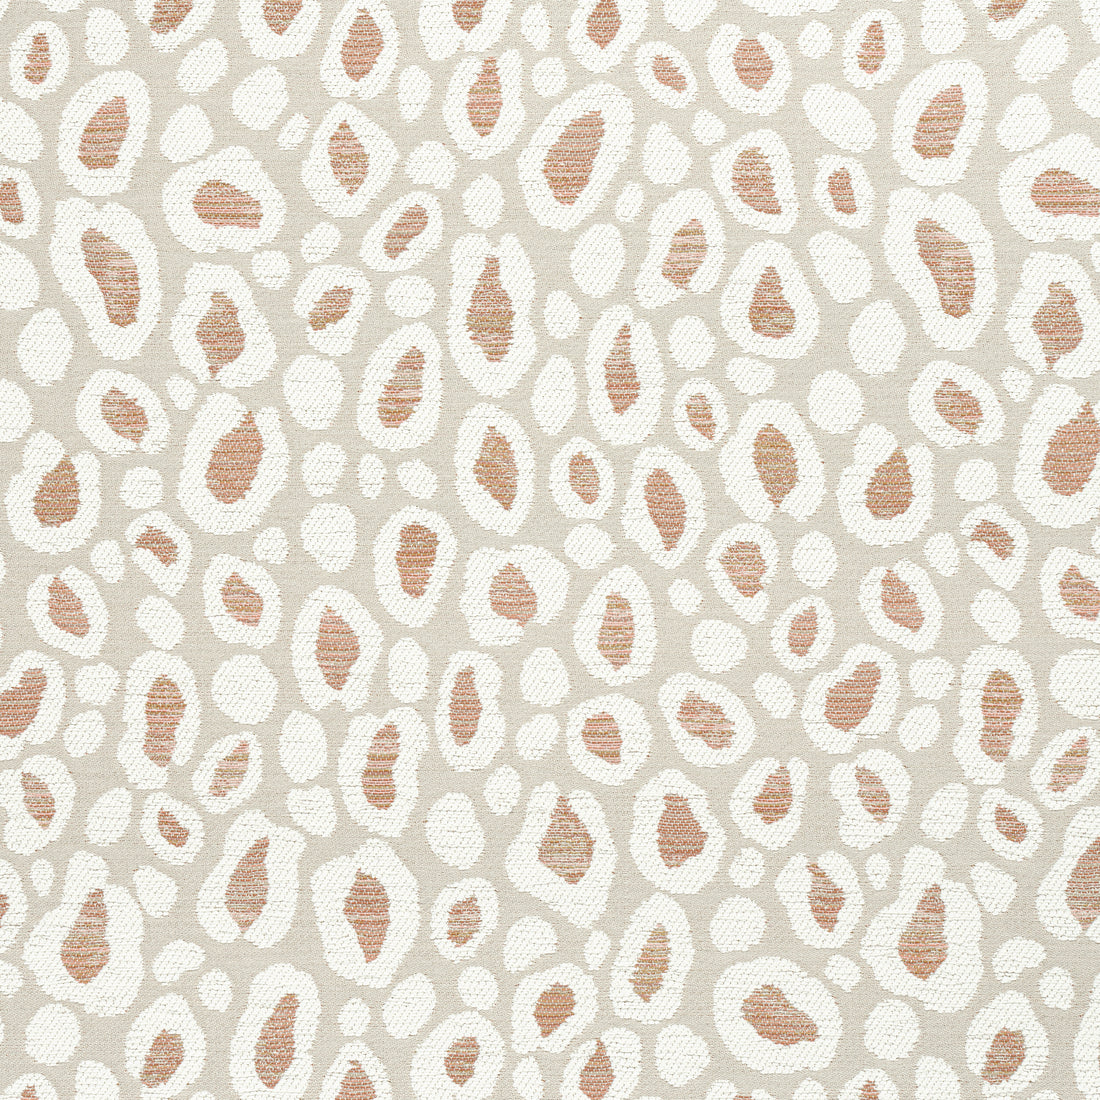 Kenzo fabric in clay color - pattern number W8825 - by Thibaut in the Haven collection